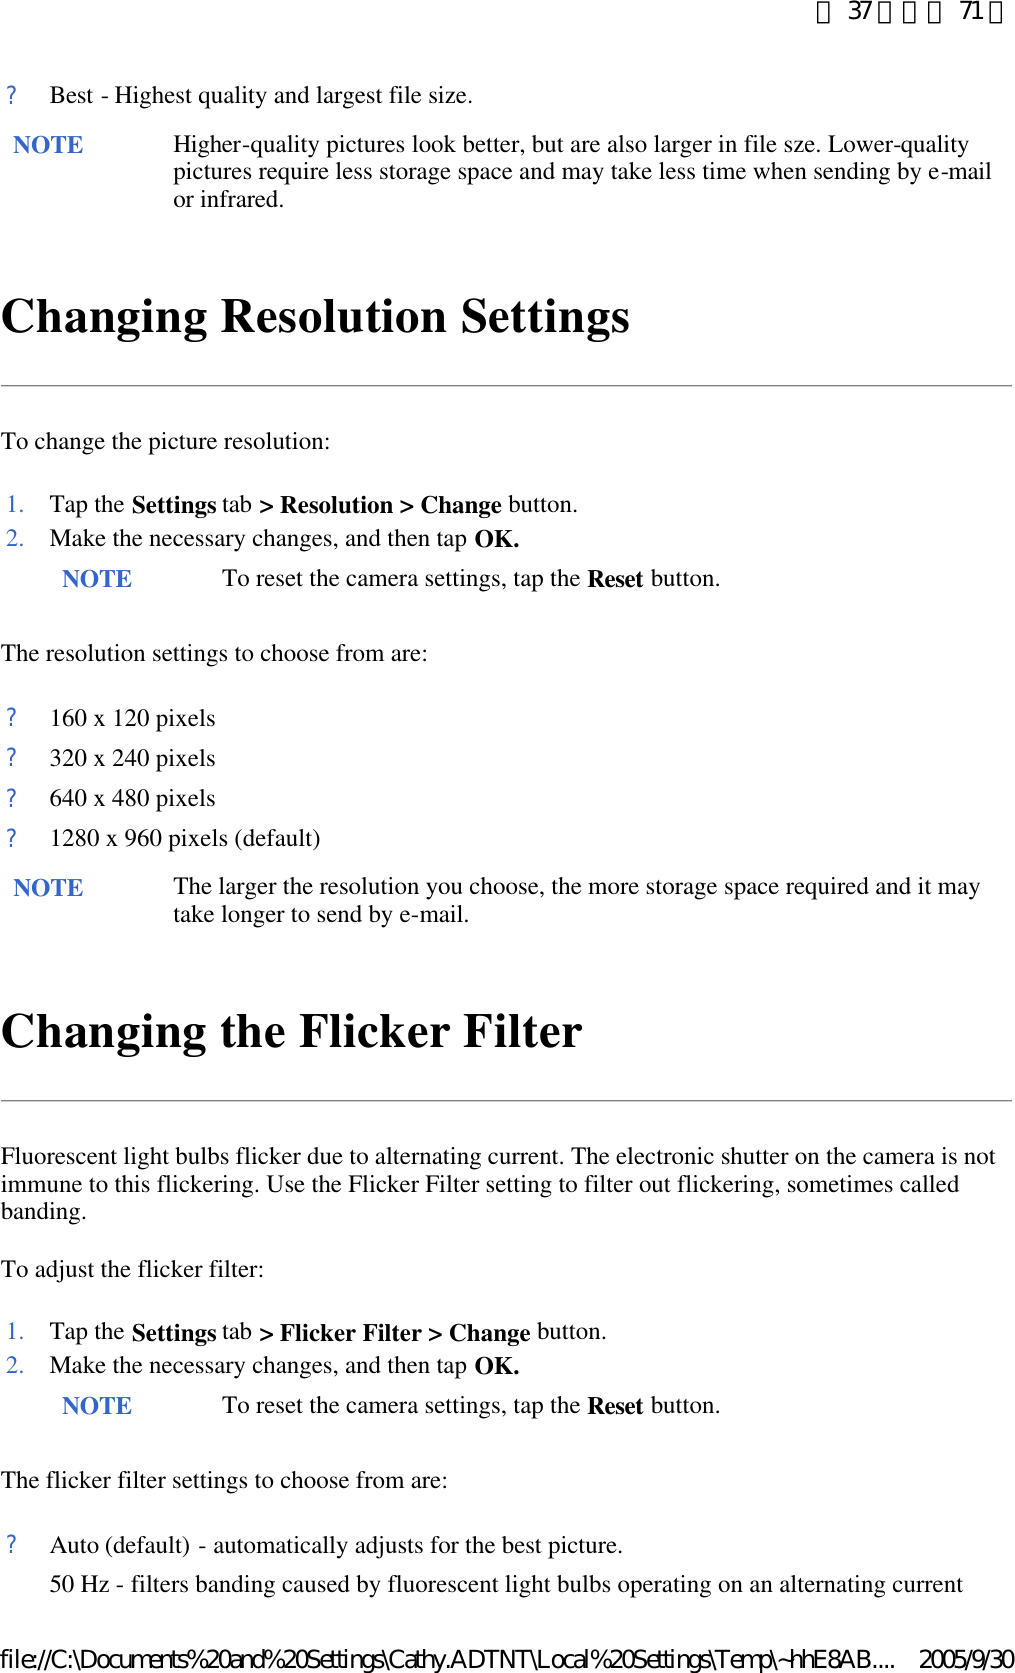 Changing Resolution Settings To change the picture resolution: The resolution settings to choose from are: Changing the Flicker Filter Fluorescent light bulbs flicker due to alternating current. The electronic shutter on the camera is not immune to this flickering. Use the Flicker Filter setting to filter out flickering, sometimes called banding.  To adjust the flicker filter: The flicker filter settings to choose from are: ?Best - Highest quality and largest file size.NOTE Higher-quality pictures look better, but are also larger in file sze. Lower-quality pictures require less storage space and may take less time when sending by e-mail or infrared.  1. Tap the Settings tab &gt; Resolution &gt; Change button. 2. Make the necessary changes, and then tap OK. NOTE To reset the camera settings, tap the Reset button. ?160 x 120 pixels?320 x 240 pixels?640 x 480 pixels?1280 x 960 pixels (default)NOTE The larger the resolution you choose, the more storage space required and it may take longer to send by e-mail. 1. Tap the Settings tab &gt; Flicker Filter &gt; Change button. 2. Make the necessary changes, and then tap OK. NOTE To reset the camera settings, tap the Reset button. ?Auto (default) - automatically adjusts for the best picture.50 Hz - filters banding caused by fluorescent light bulbs operating on an alternating current 第 37 頁，共 71 頁2005/9/30file://C:\Documents%20and%20Settings\Cathy.ADTNT\Local%20Settings\Temp\~hhE8AB....